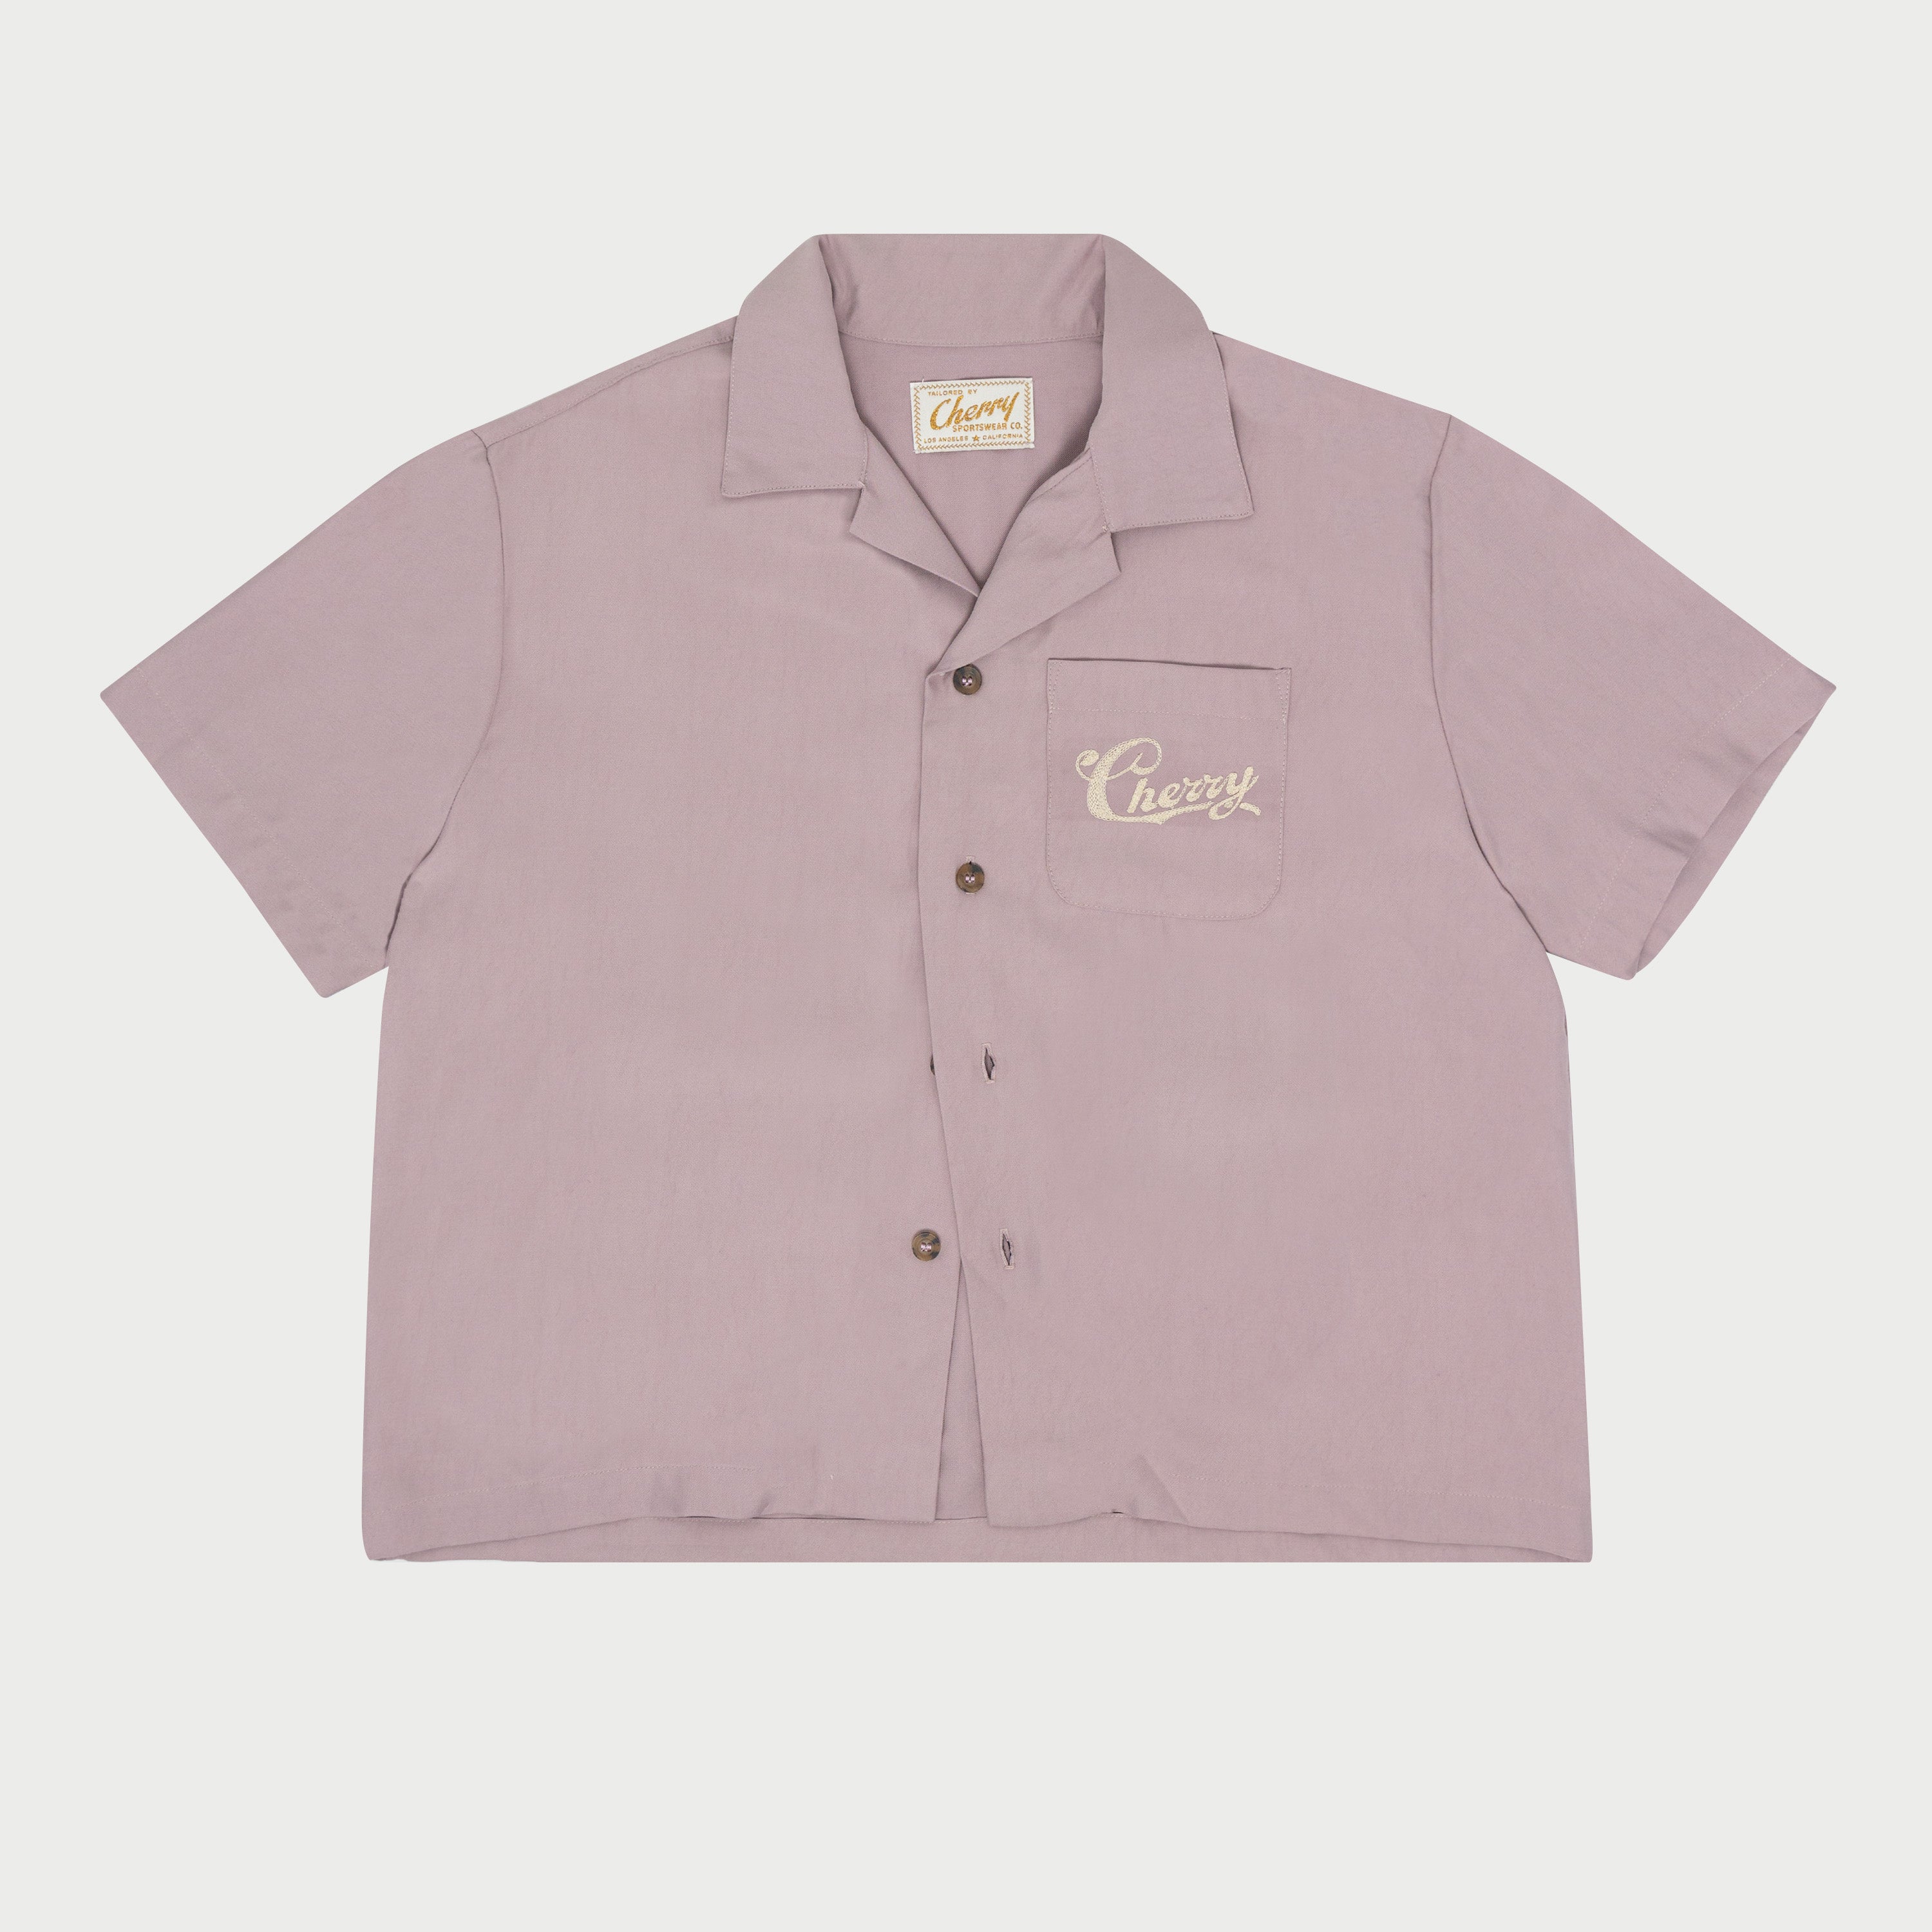 American Flavor Bowling Shirt (Dusty Pink)